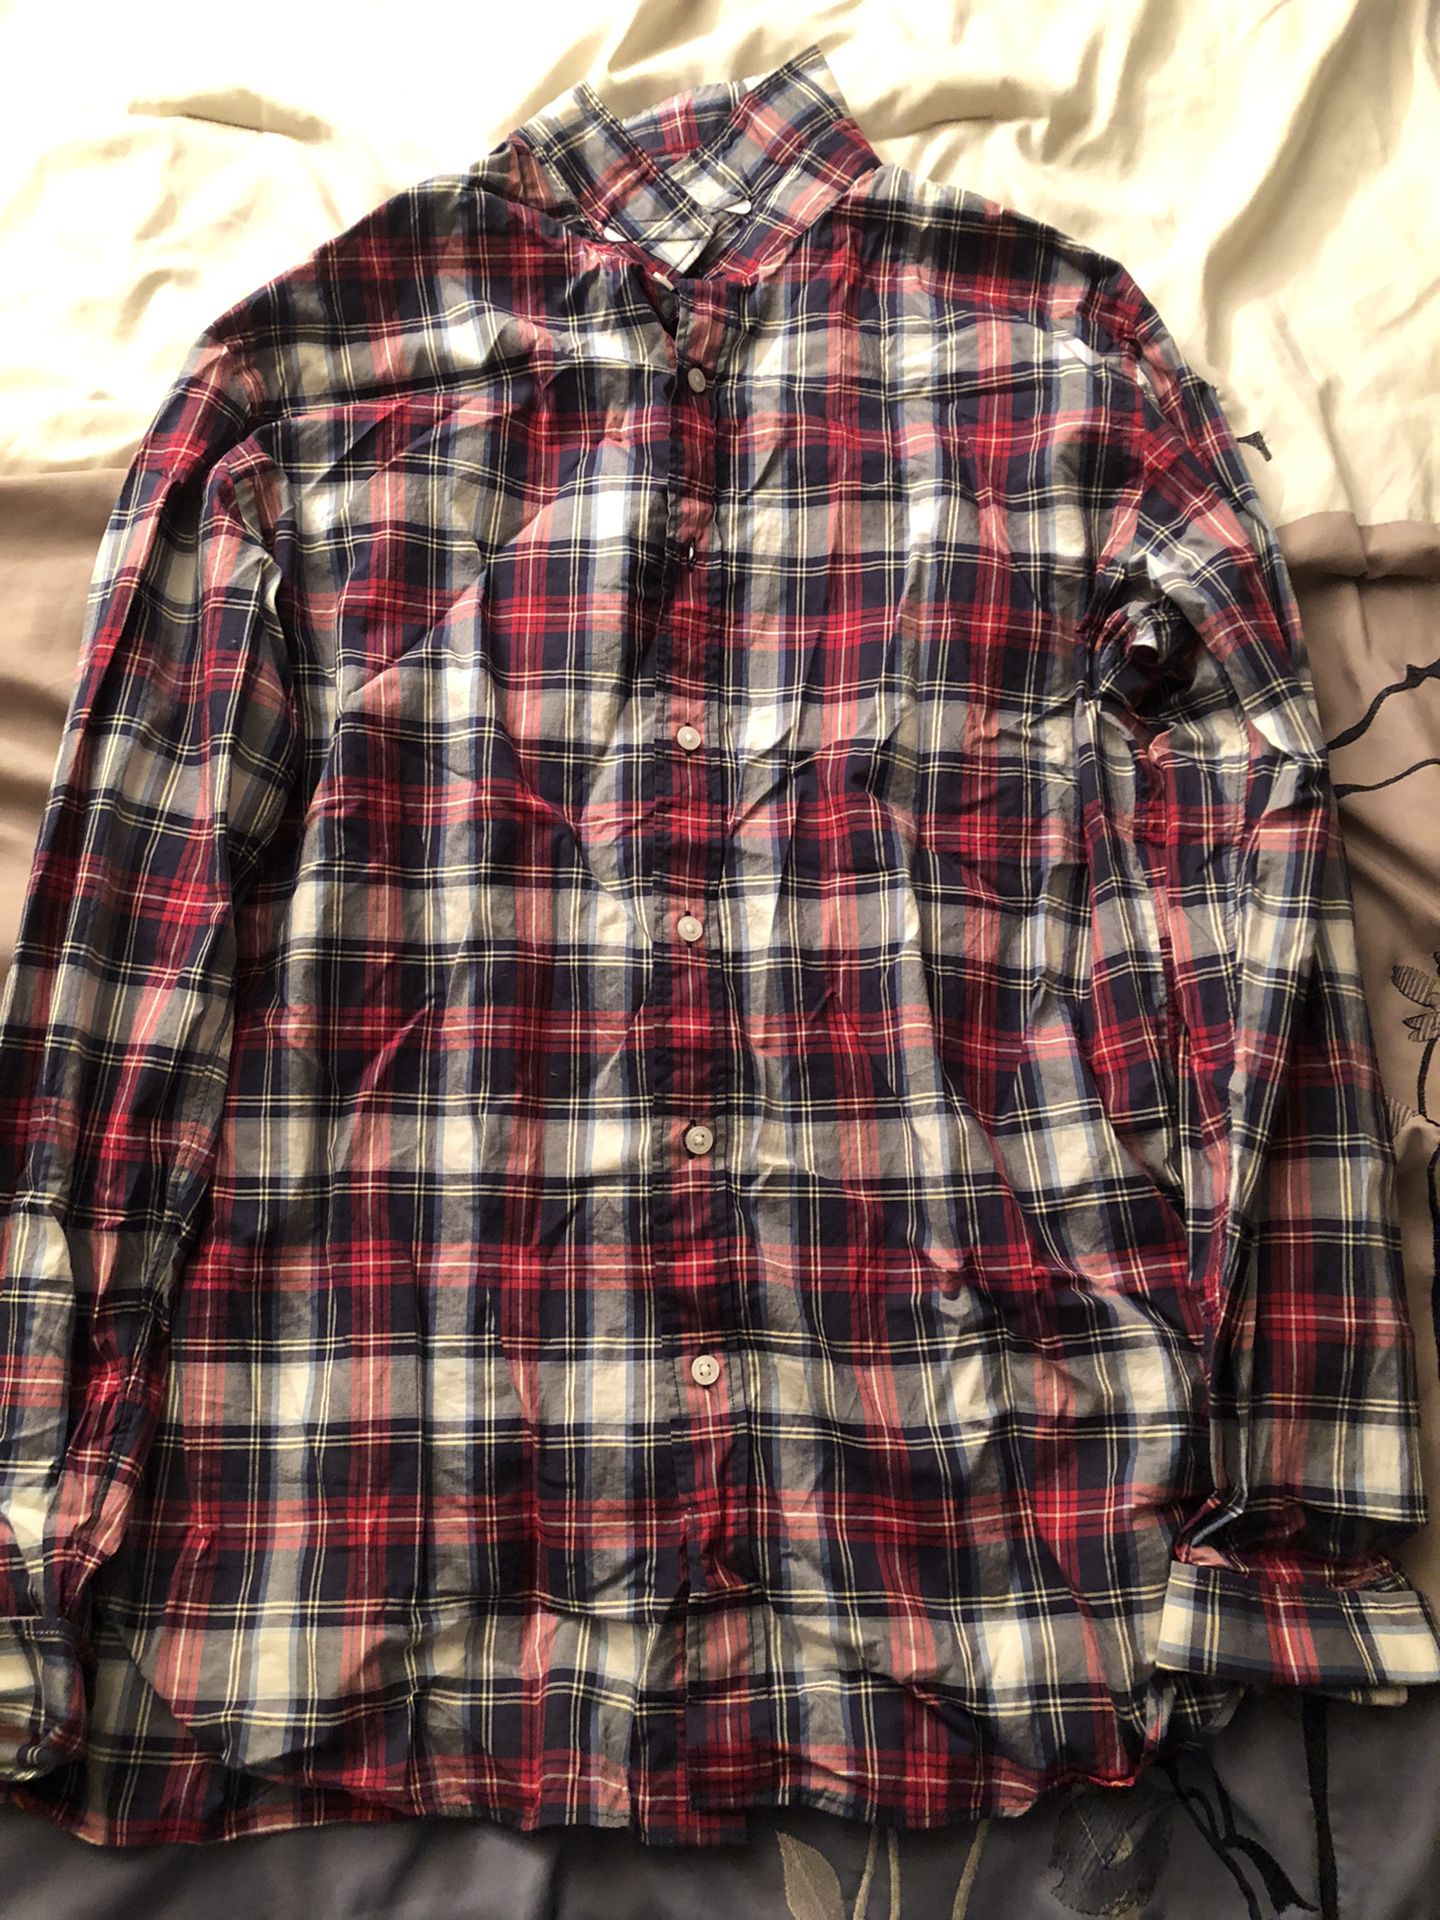 red and blue plaid button up shirt size medium 